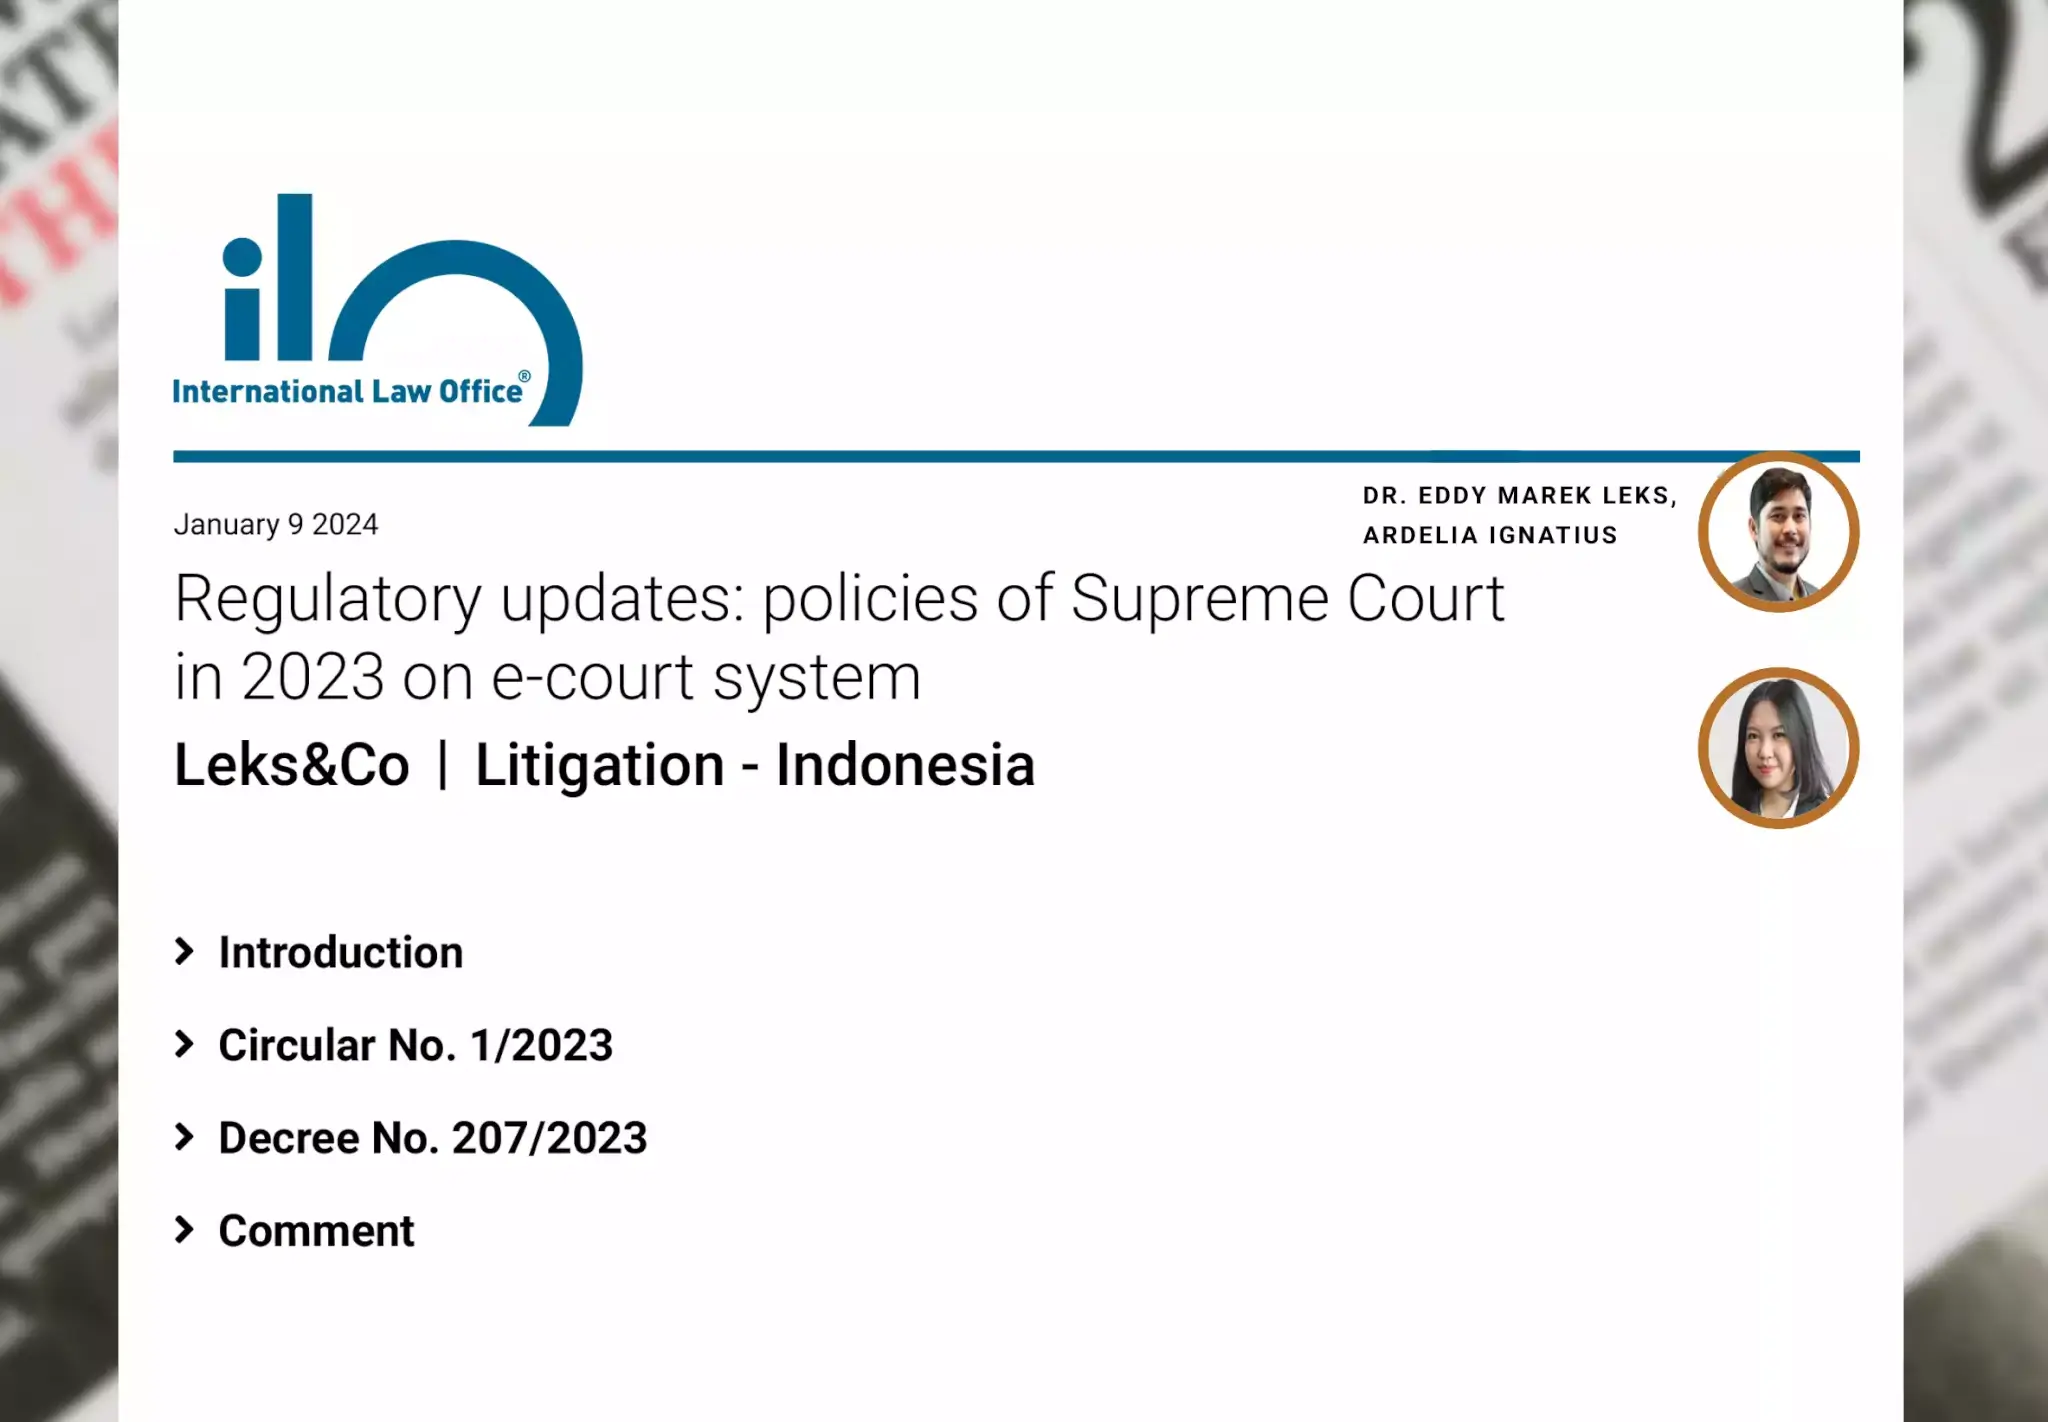 Regulation Updates: Policies of Supreme Court in 2023 on E-Court System – Published by Lexology January 2024 Edition